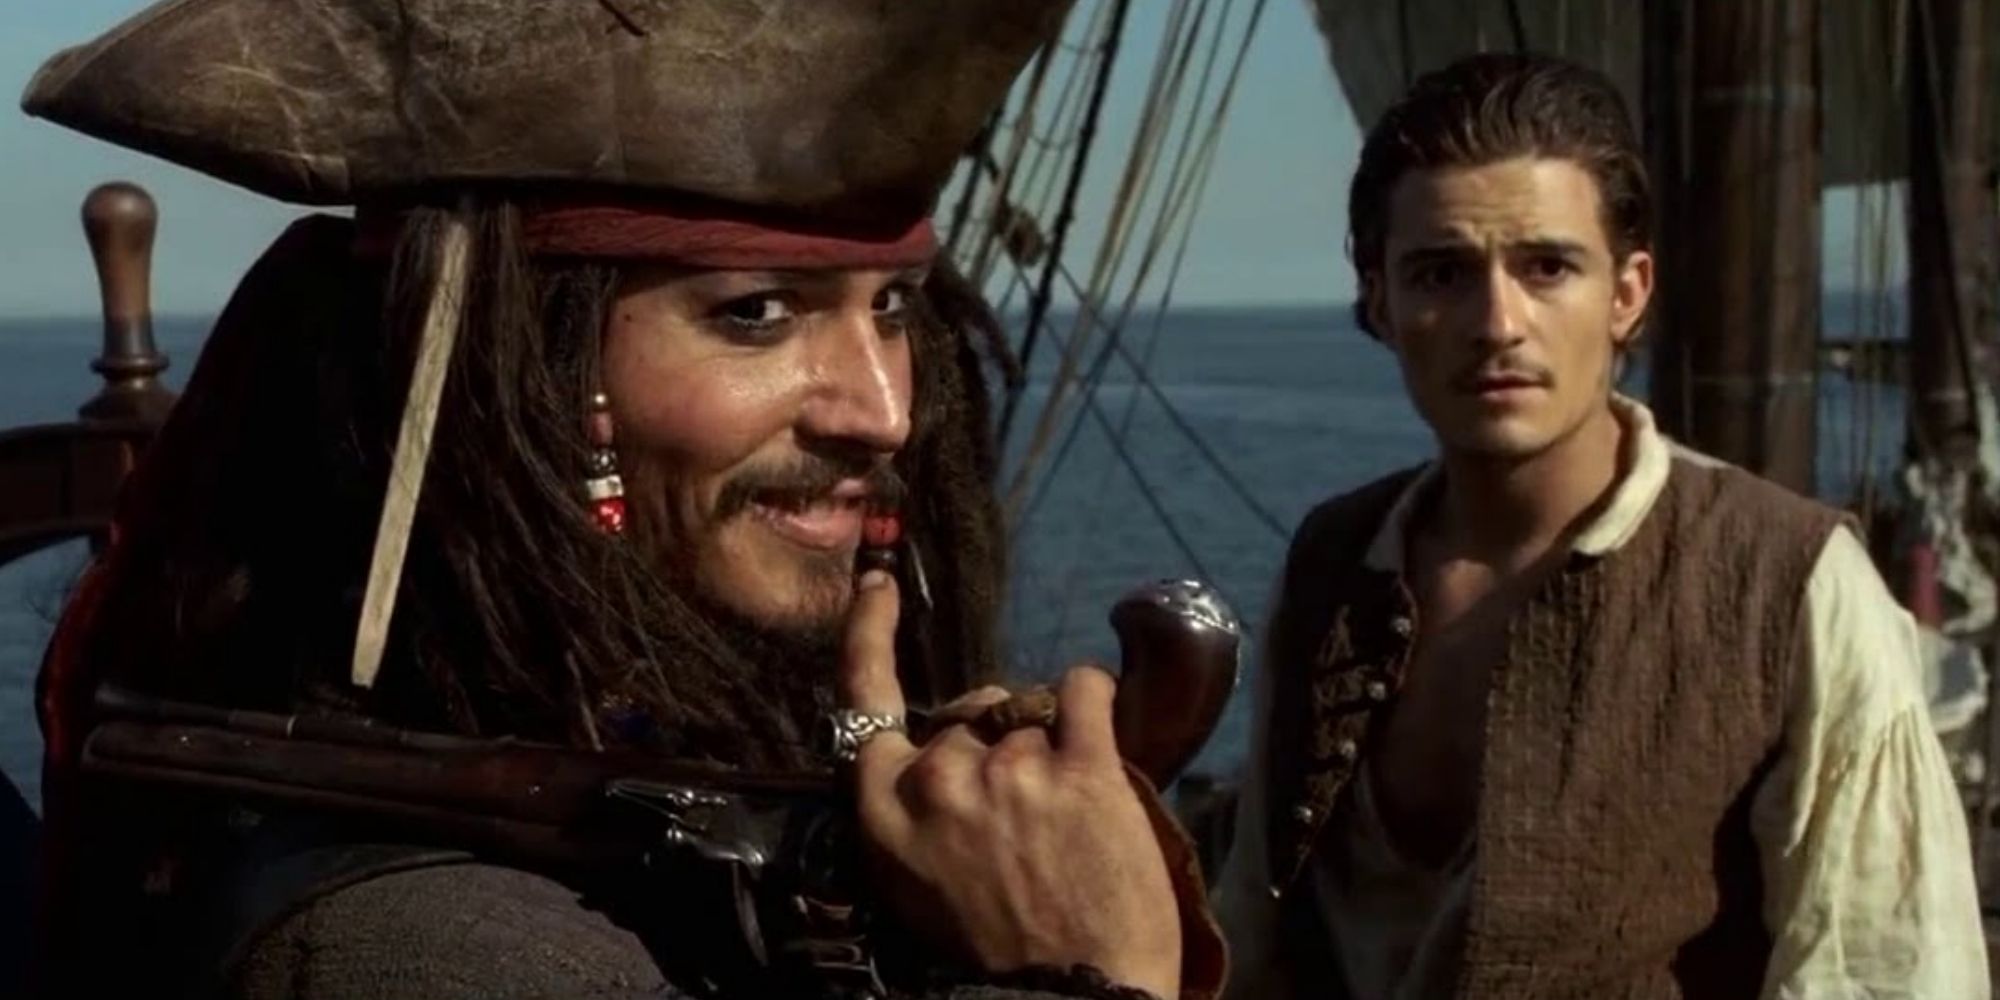 Jack Sparrow, played by Johnny Depp, and Will Turner, played by Orlando Bloom.